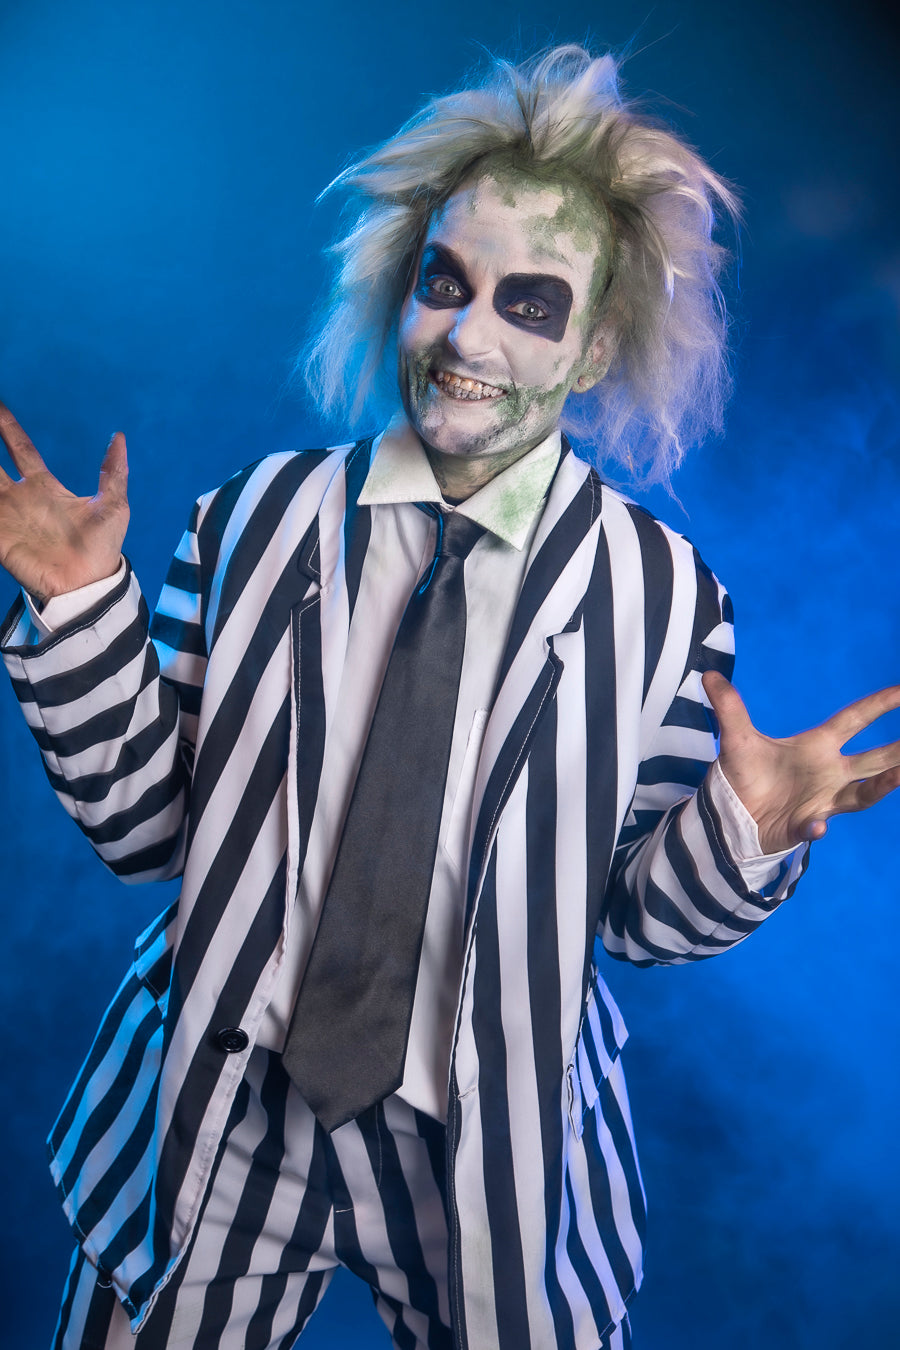 Beetlejuice inspired by the Tim Burton Classic, Costume Hire or Cosplay, plus Makeup and Photography. Proudly by and available at, Little Shop of Horrors Costumery 6/1 Watt Rd Mornington & Melbourne.